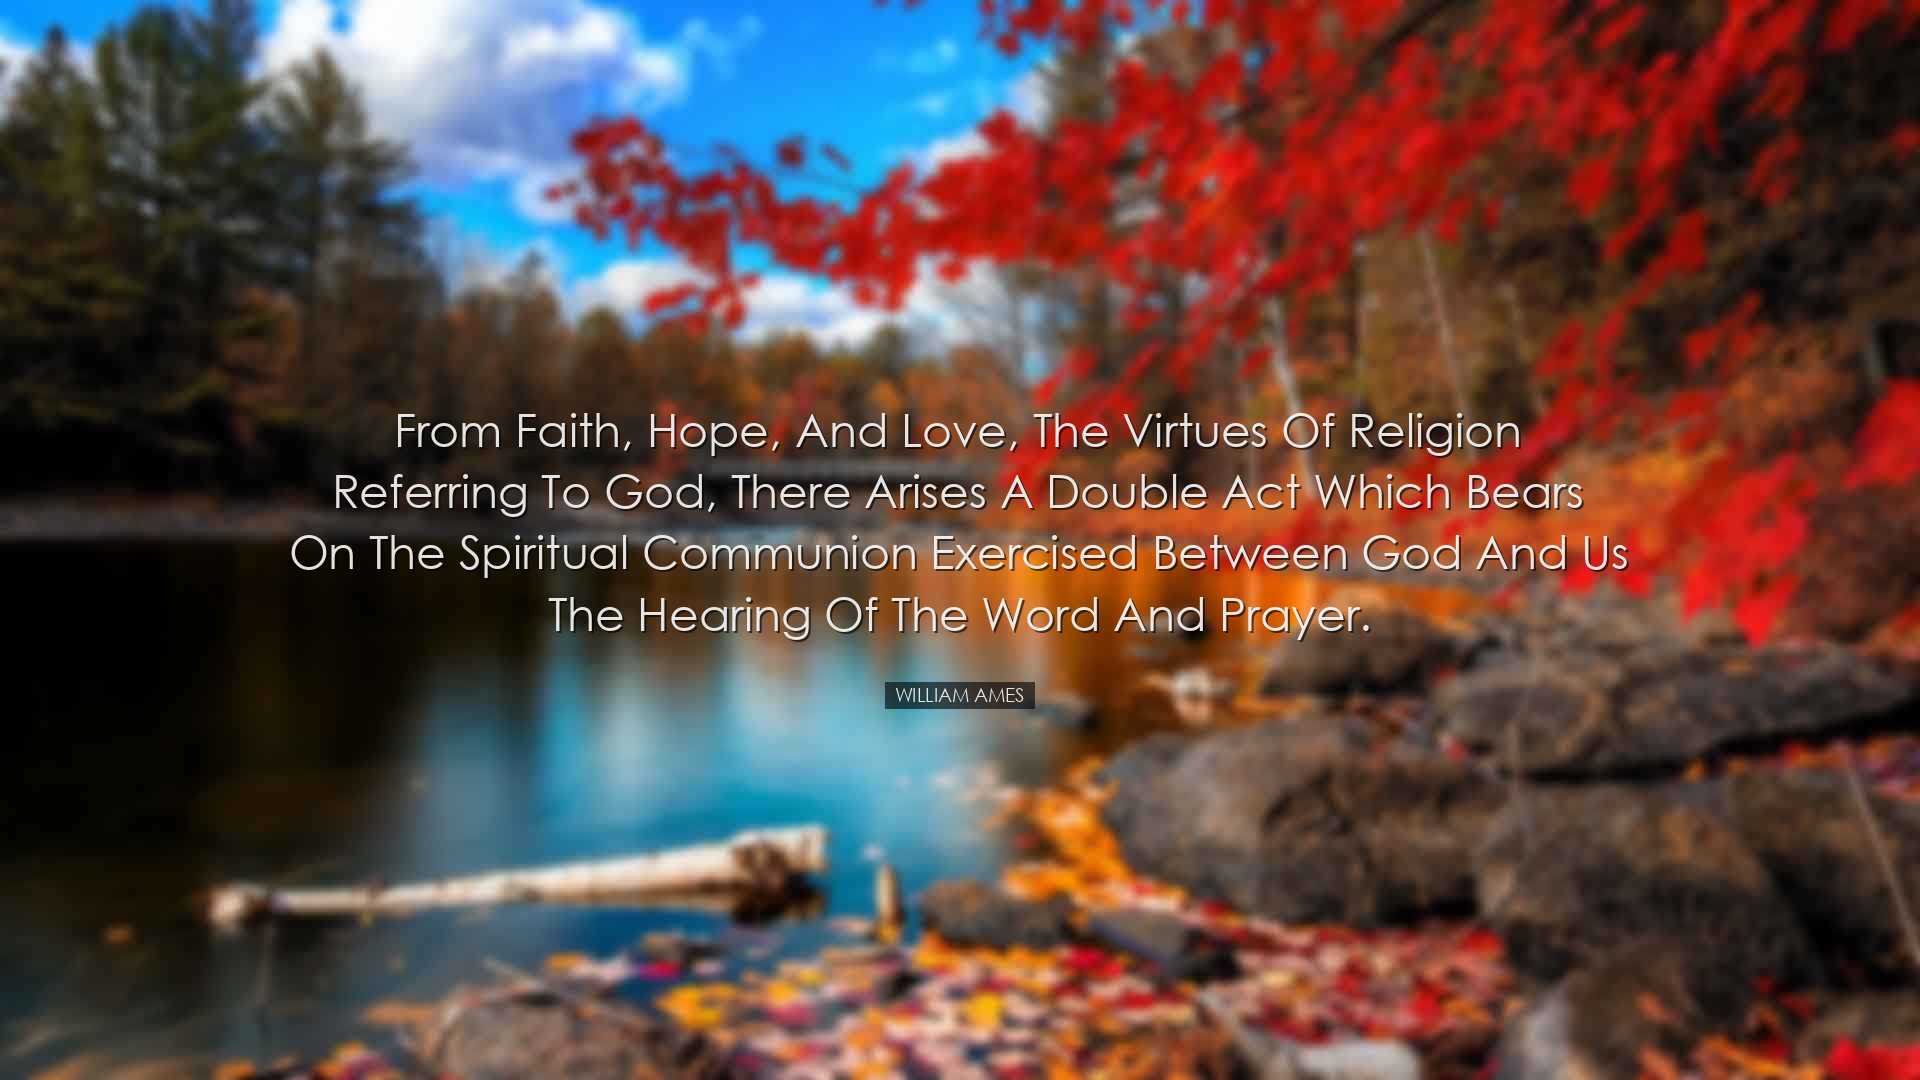 From faith, hope, and love, the virtues of religion referring to G